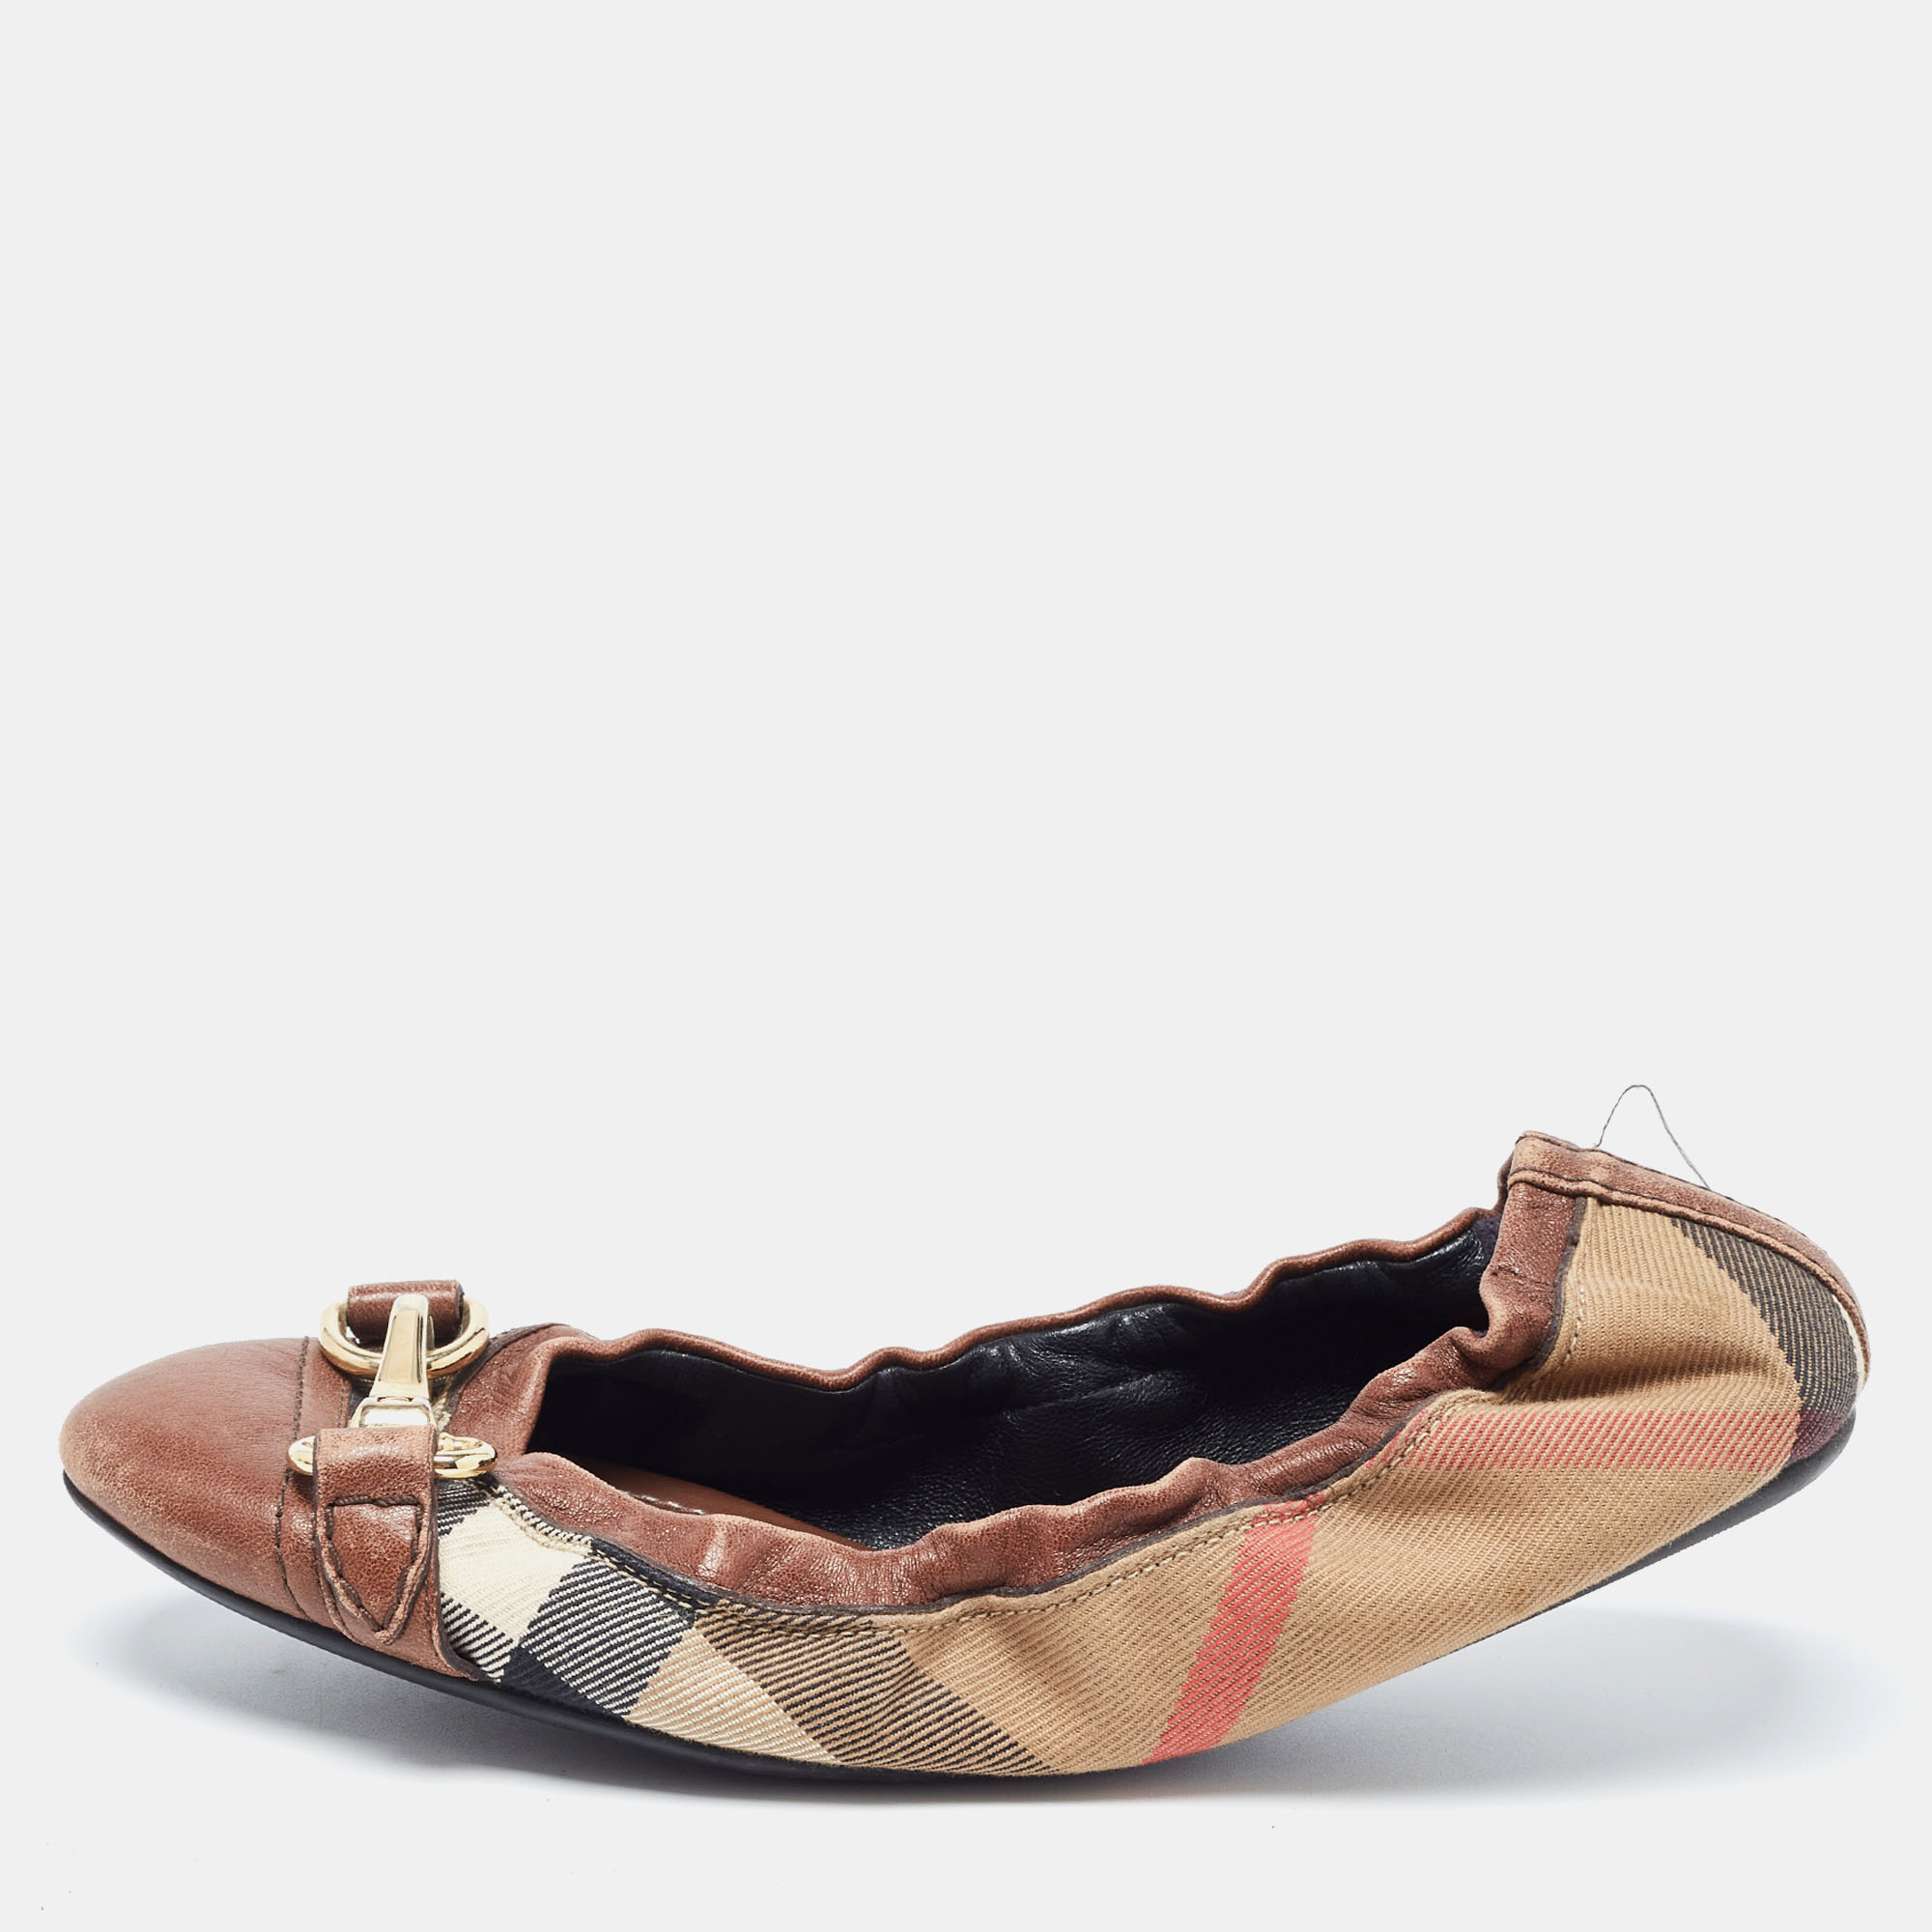 Burberry Brown/Beige Leather And Nova Check Canvas Scrunch Ballet Flats Size 37